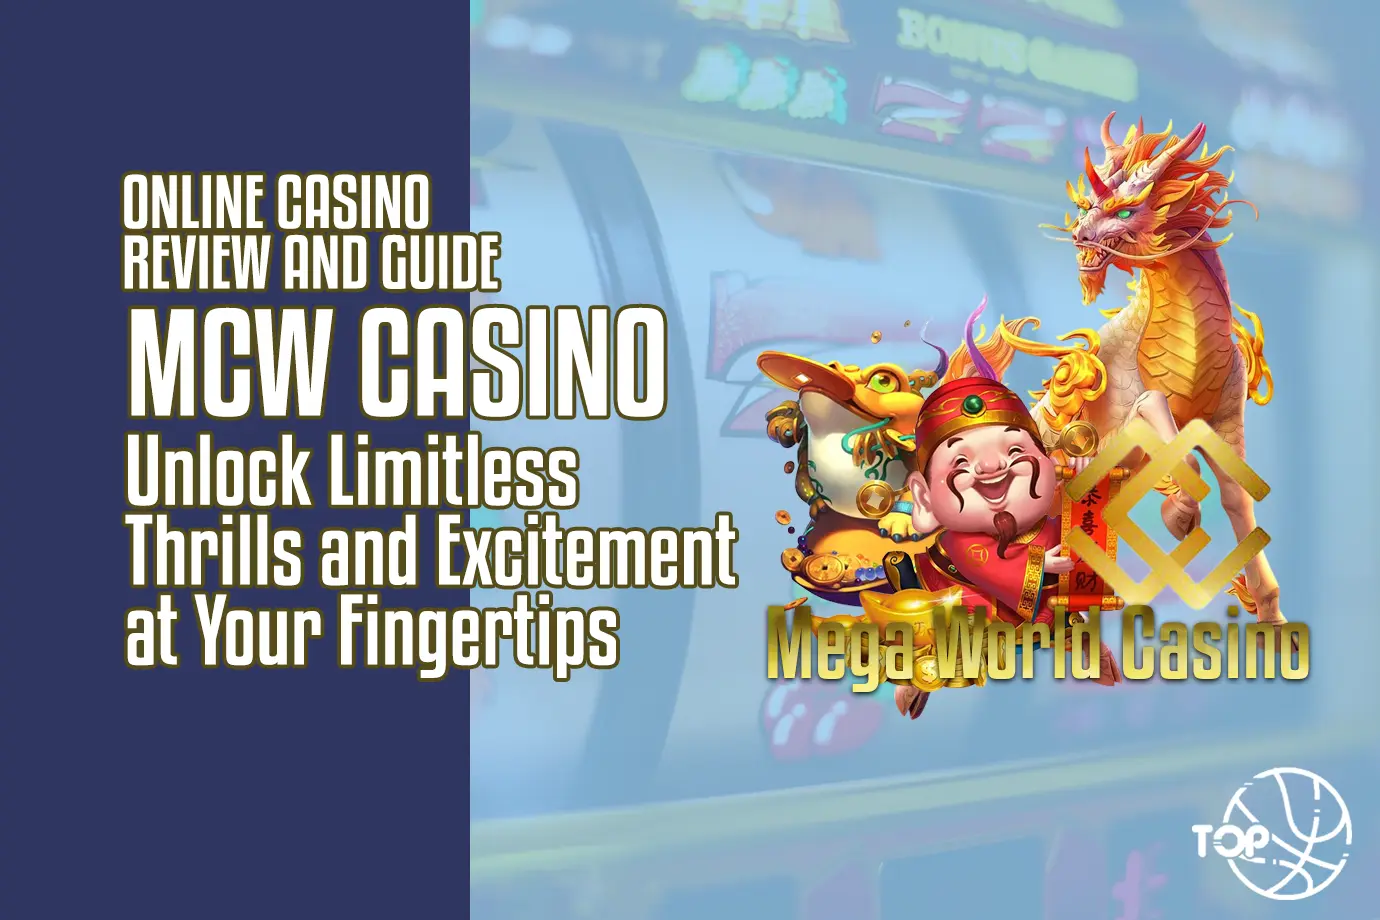 MCW Casino Guide: Unlock Limitless Thrills and Excitement at Your Fingertips